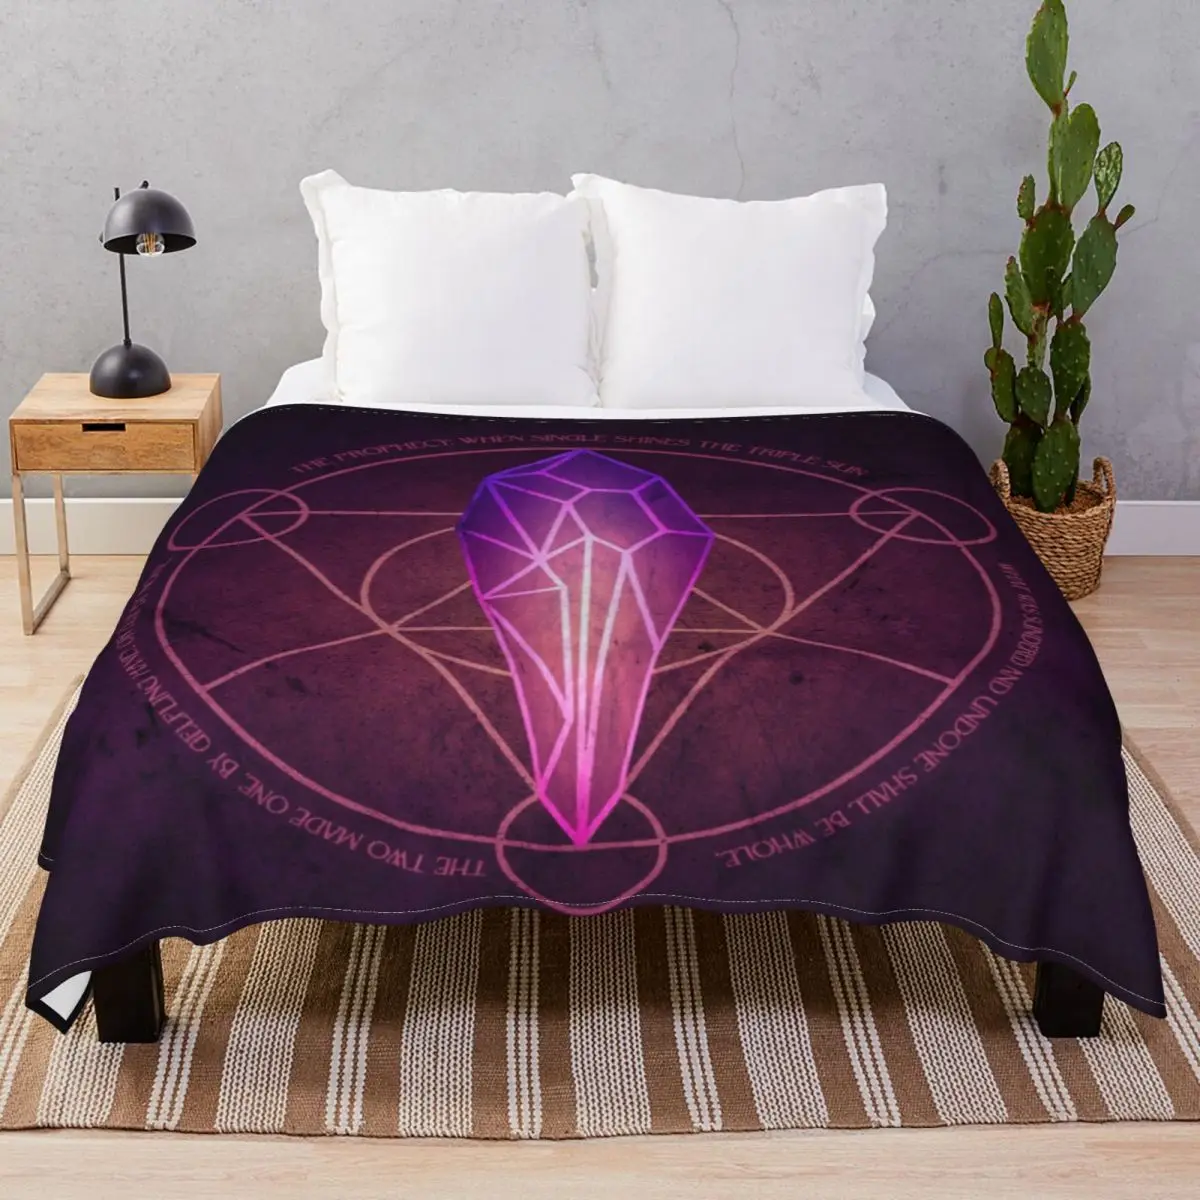 Dark Crystal Prophecy Blanket Flannel Summer Multifunction Throw Blankets for Bedding Home Couch Travel Cinema